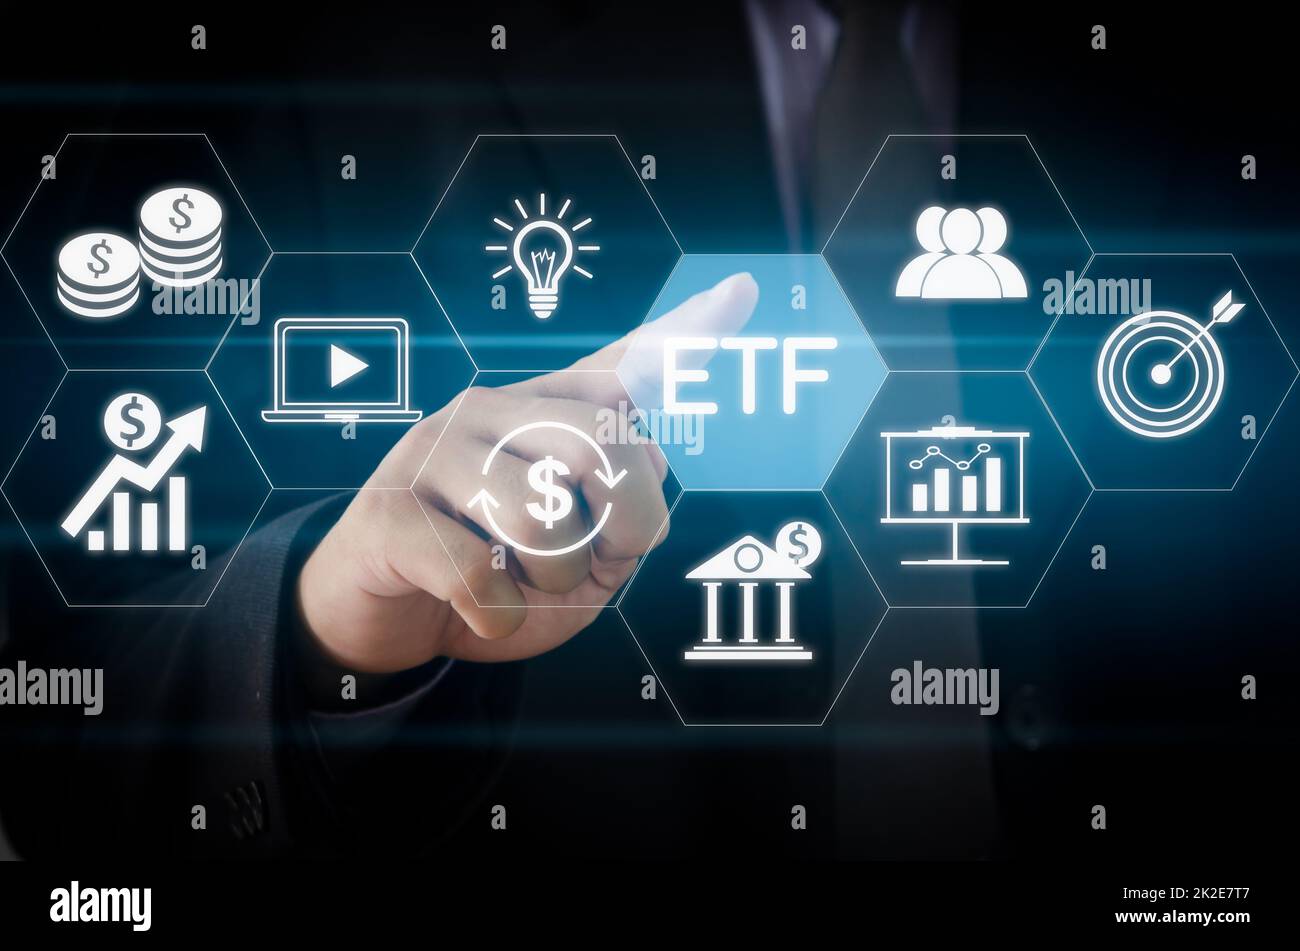 Hand businessman icon ETF Exchange Traded Fund virtual screen Internet Business stock market finance Index Fund Concept. Stock Photo